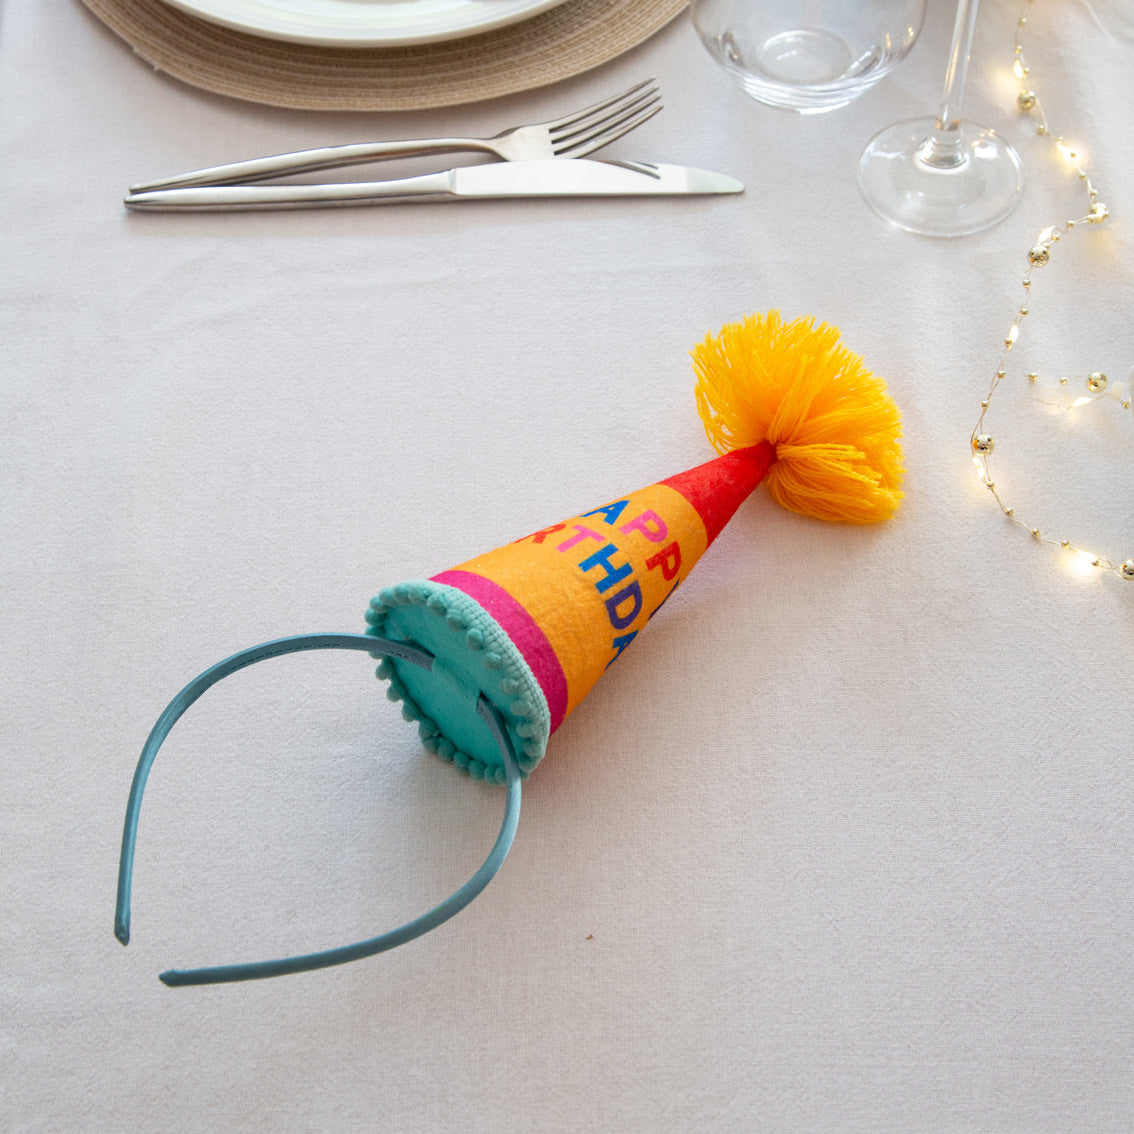 Blue headband with traditional cone party hat on top with pompom on top, featuring the words happy birthday, lying on a party table.